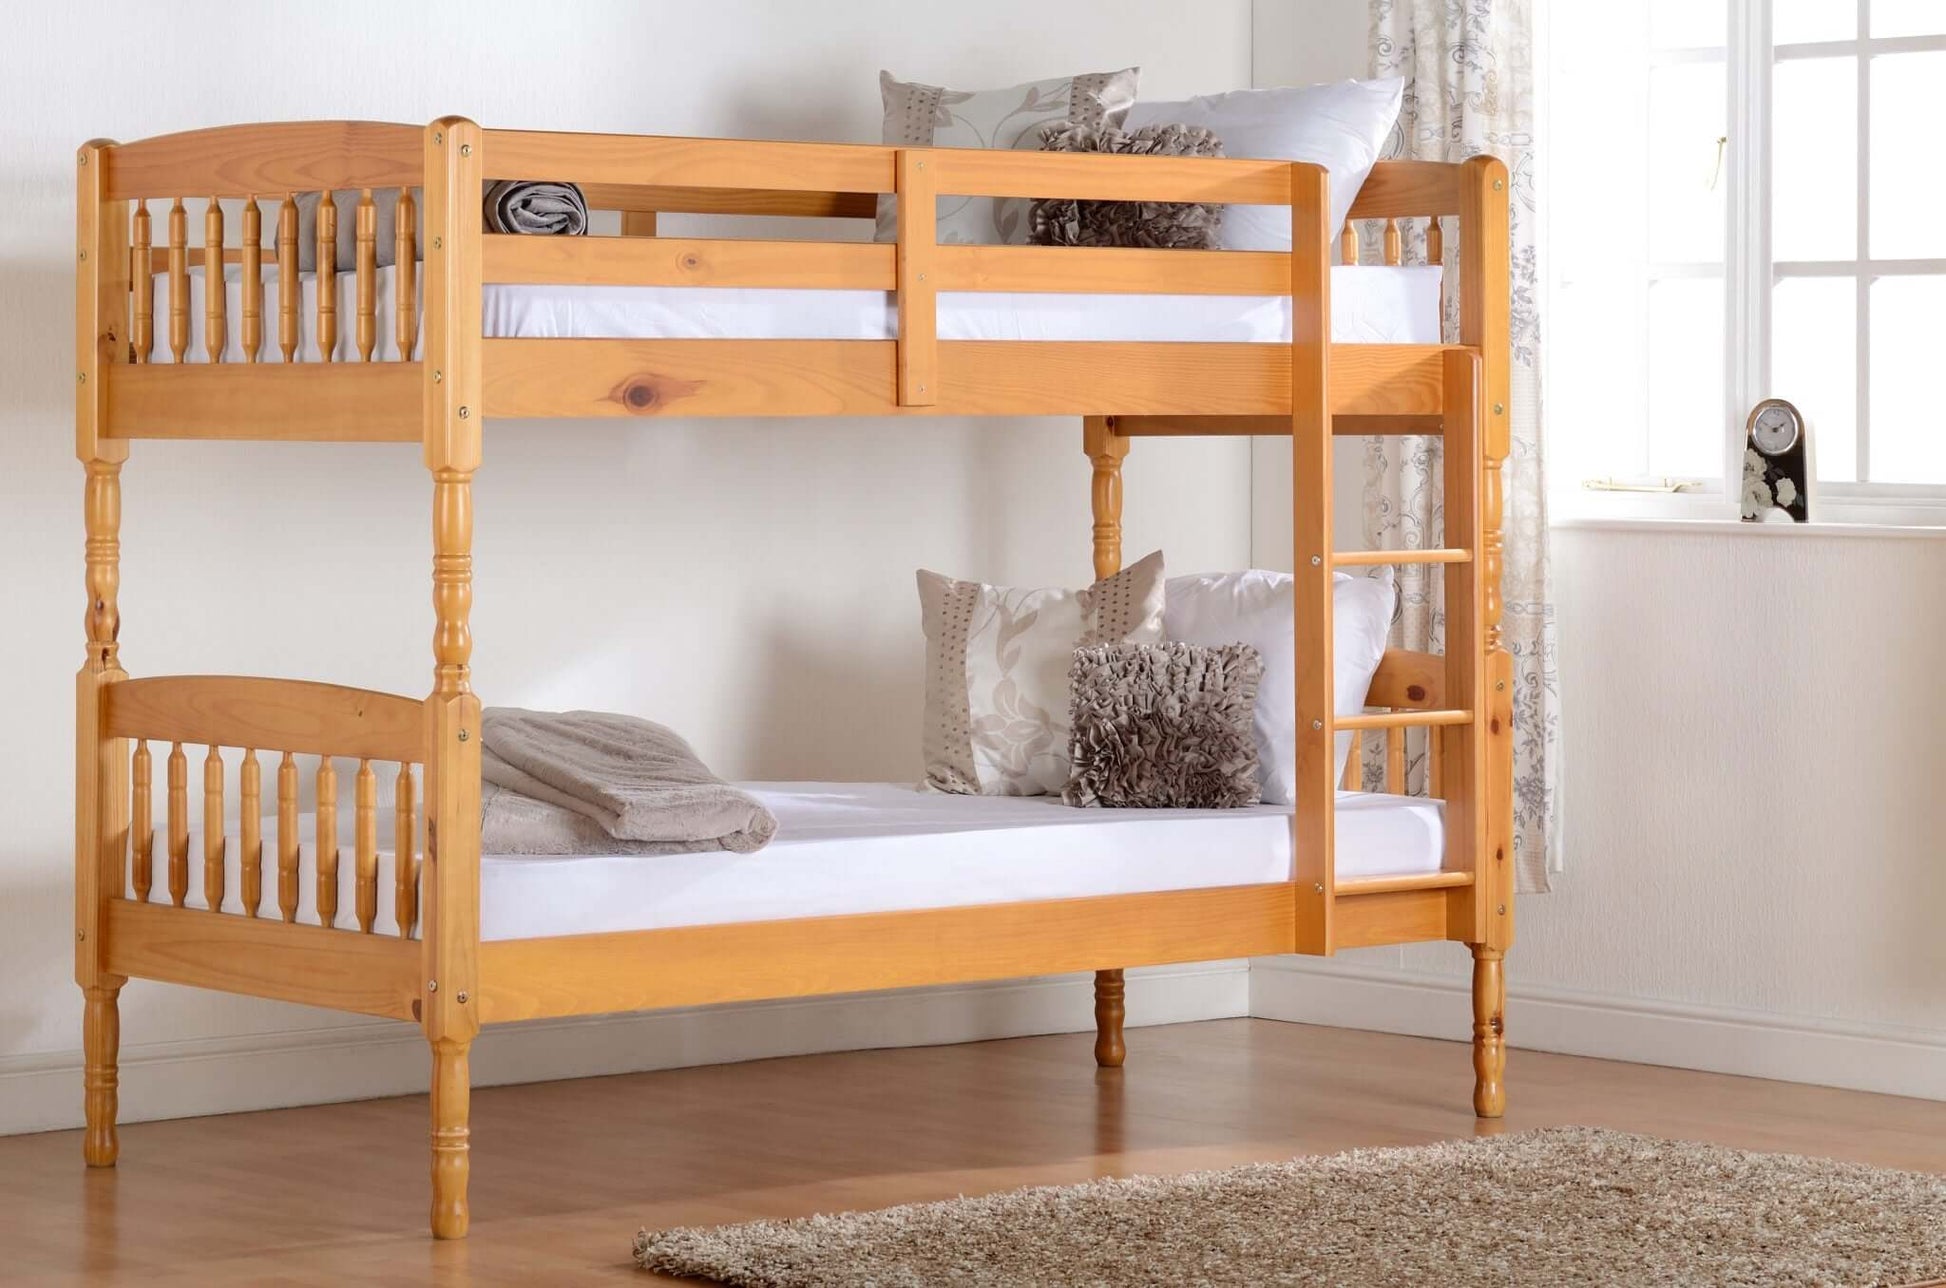 Albany 3' Bunk Bed Antique Pine- The Right Buy Store